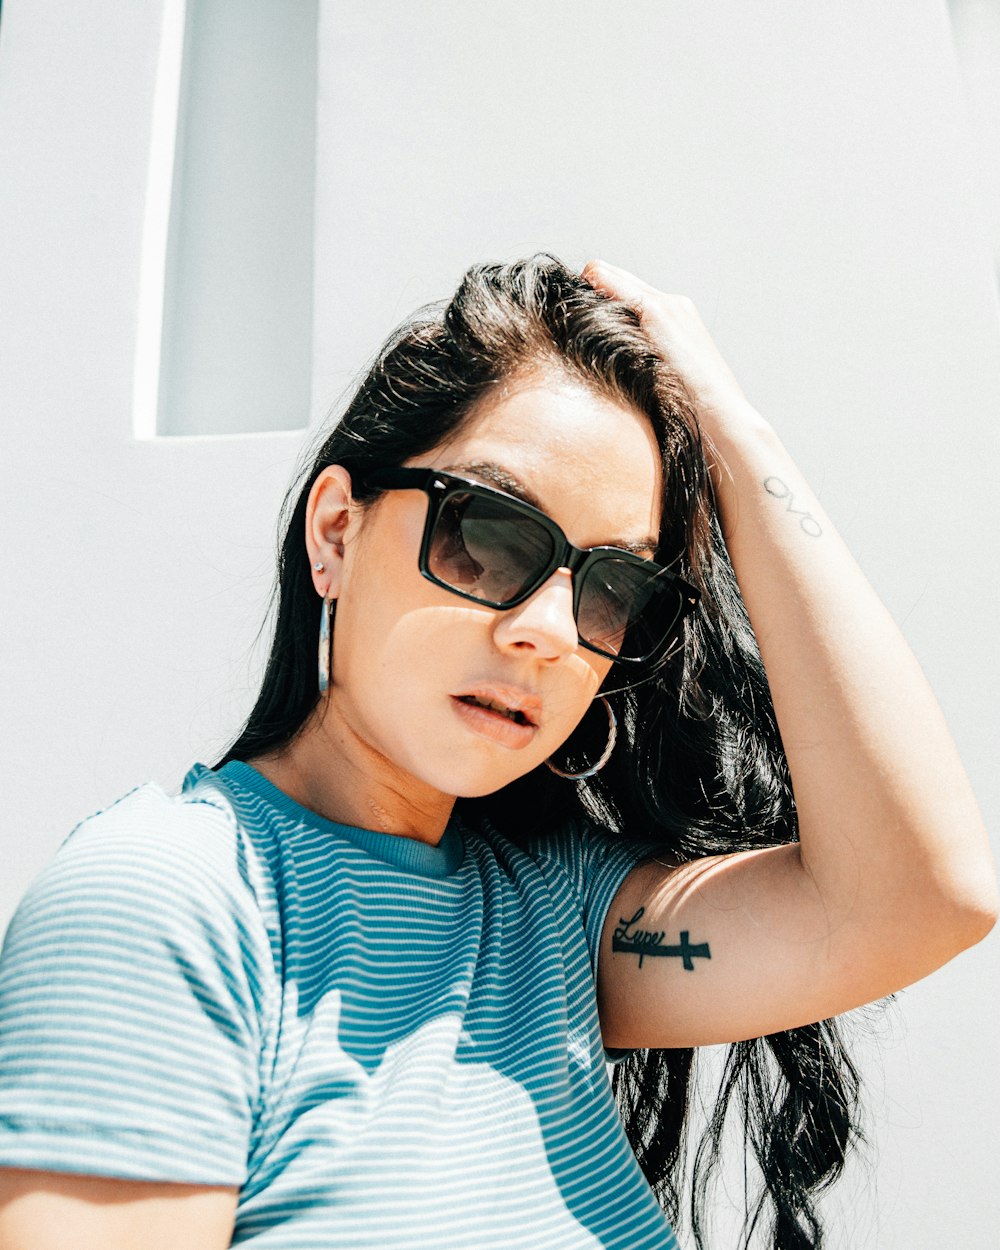 woman in blue and white striped shirt wearing black sunglasses